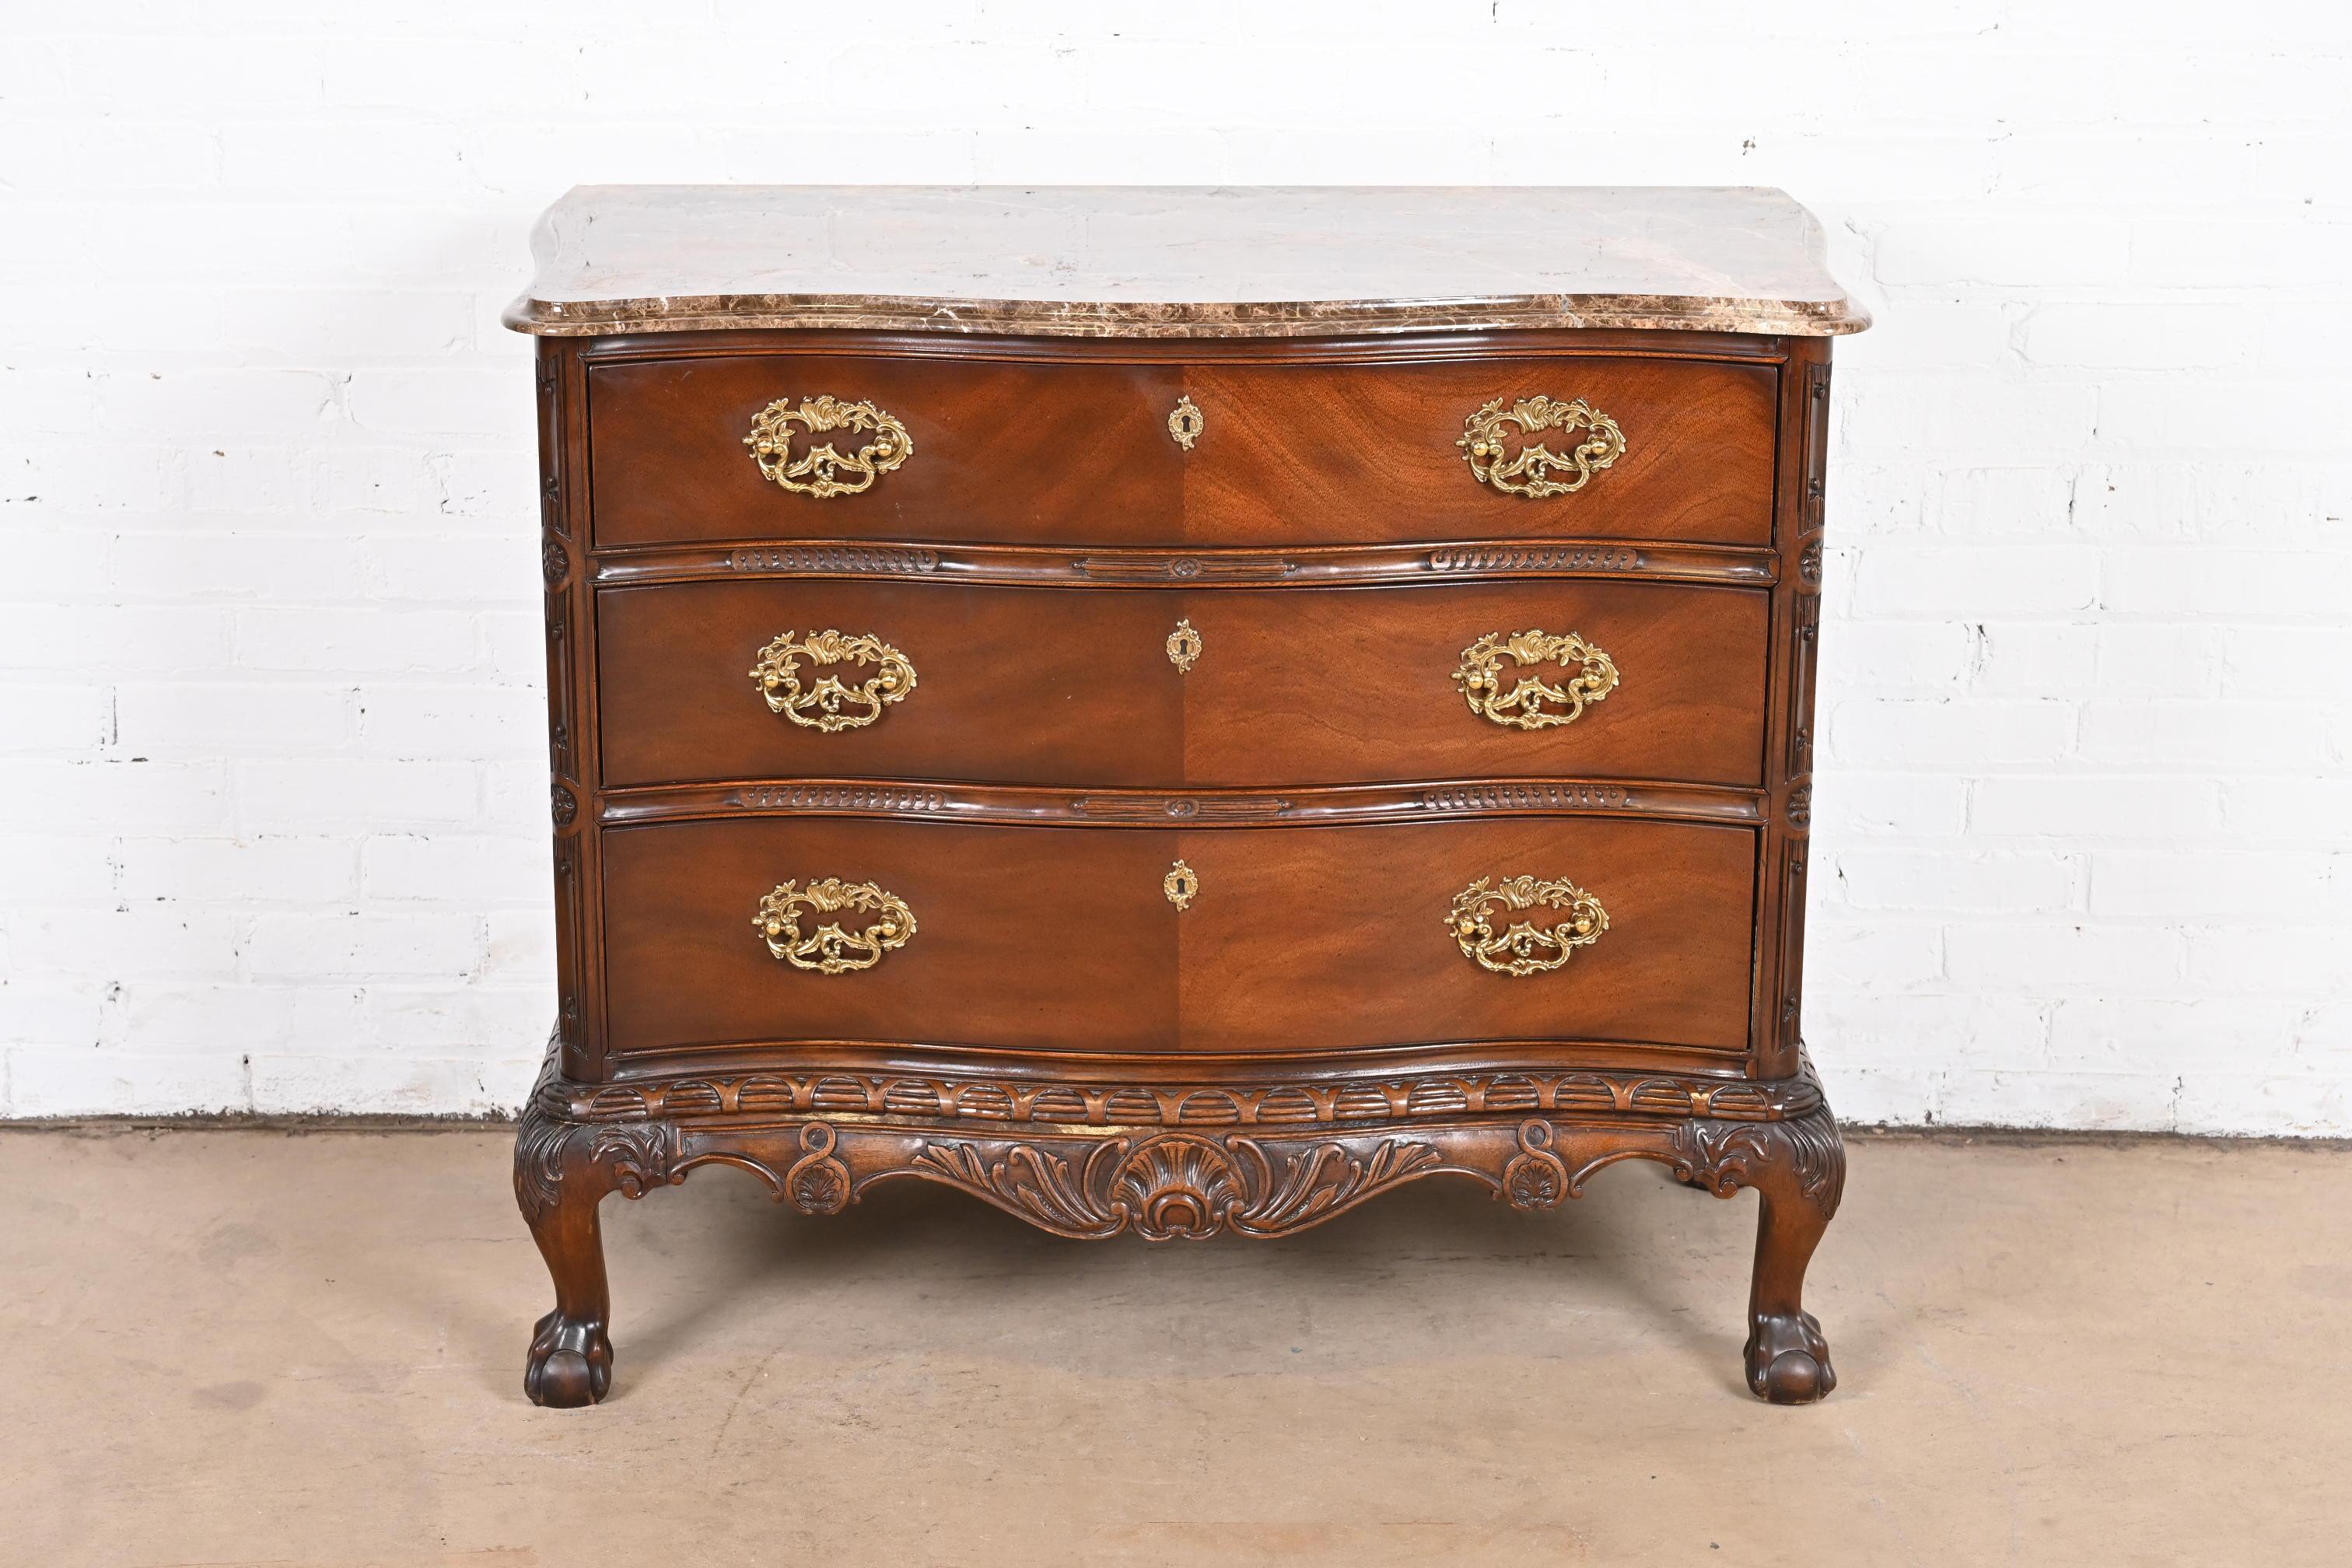 A gorgeous Chippendale or Georgian style commode or chest of drawers

By Henredon

USA, circa 1990s

Carved mahogany, with thick beveled marble top, and original brass hardware.

Measures: 39.5